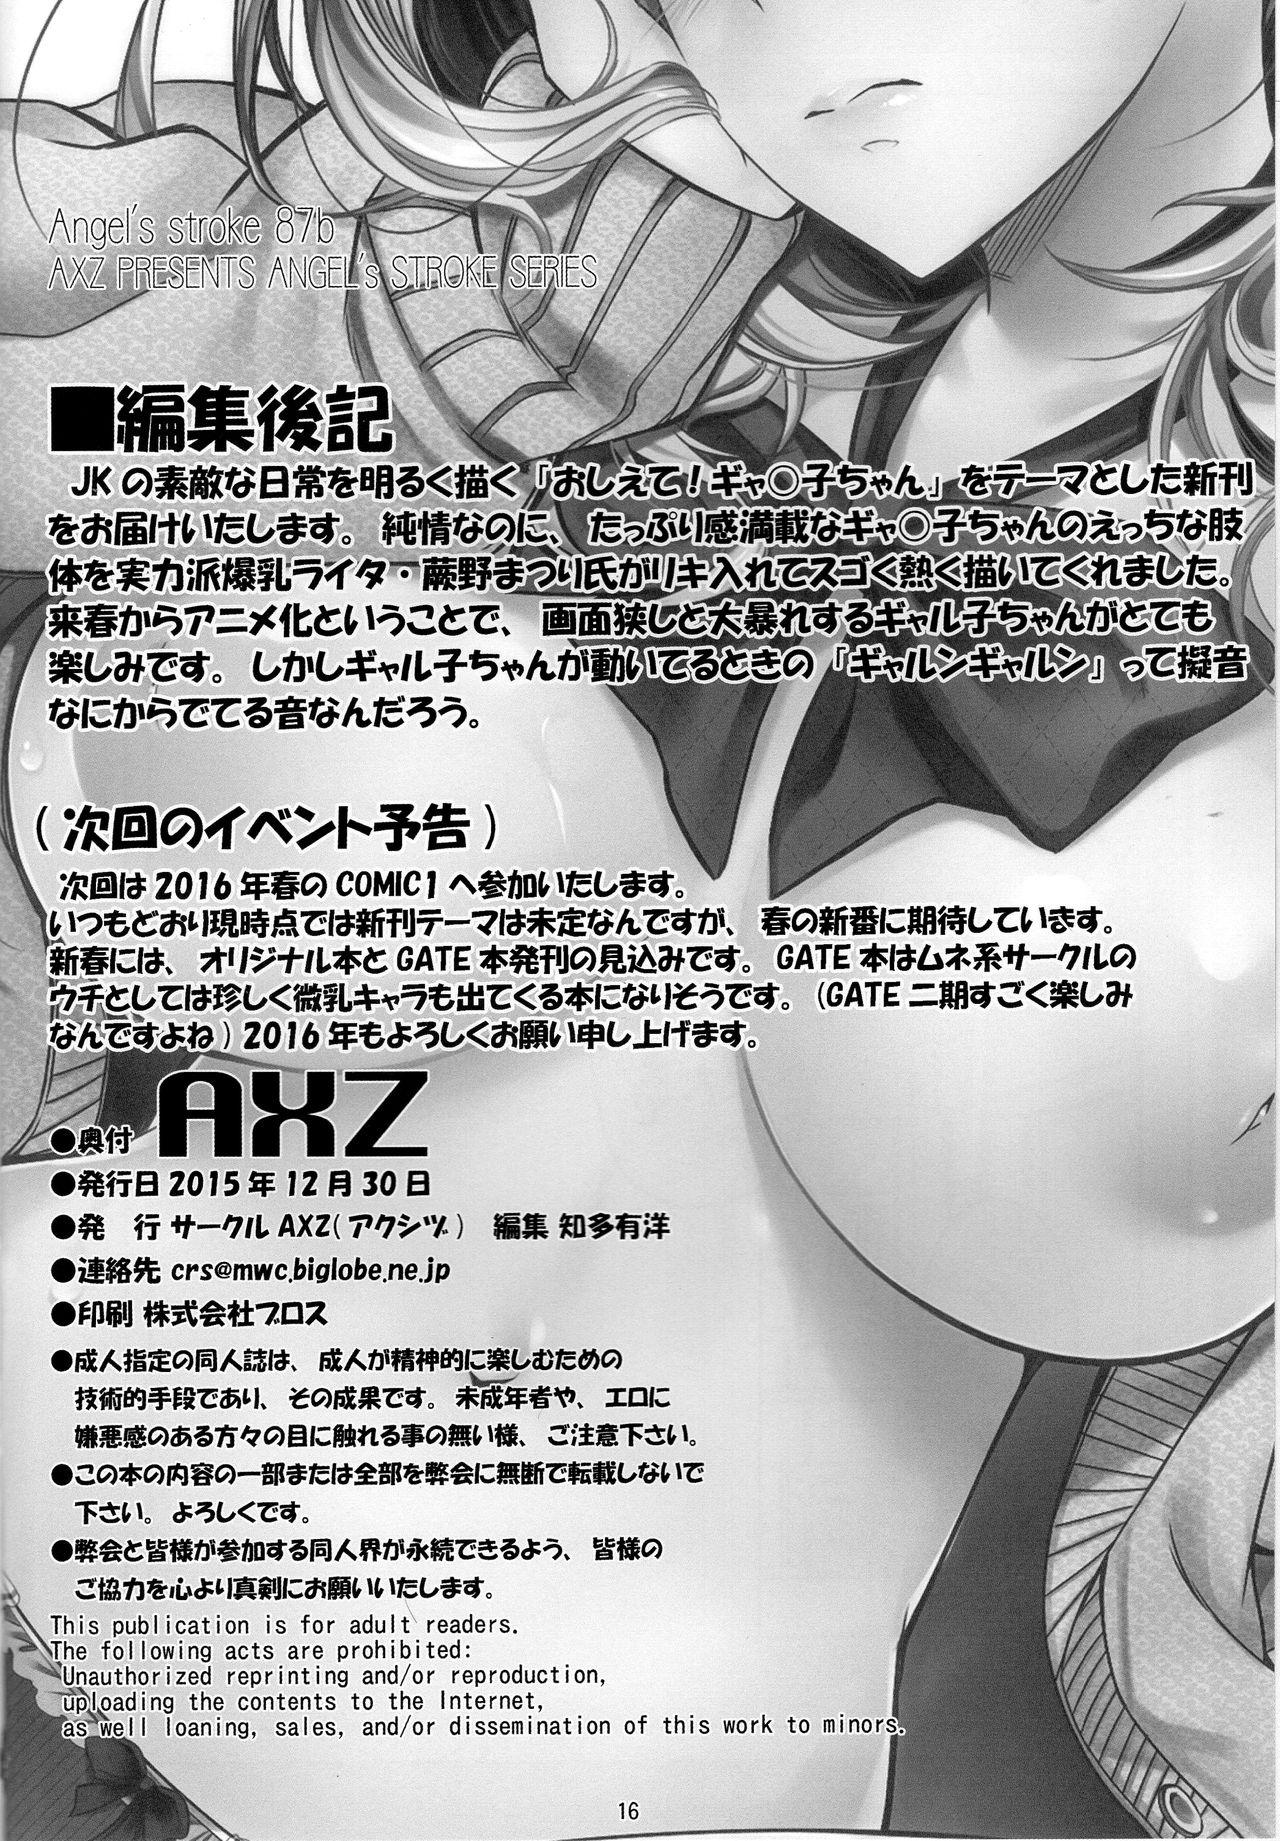 Screaming Angel's Stroke 87b Galko-chan 0.02!! - Oshiete galko-chan Mouth - Page 18